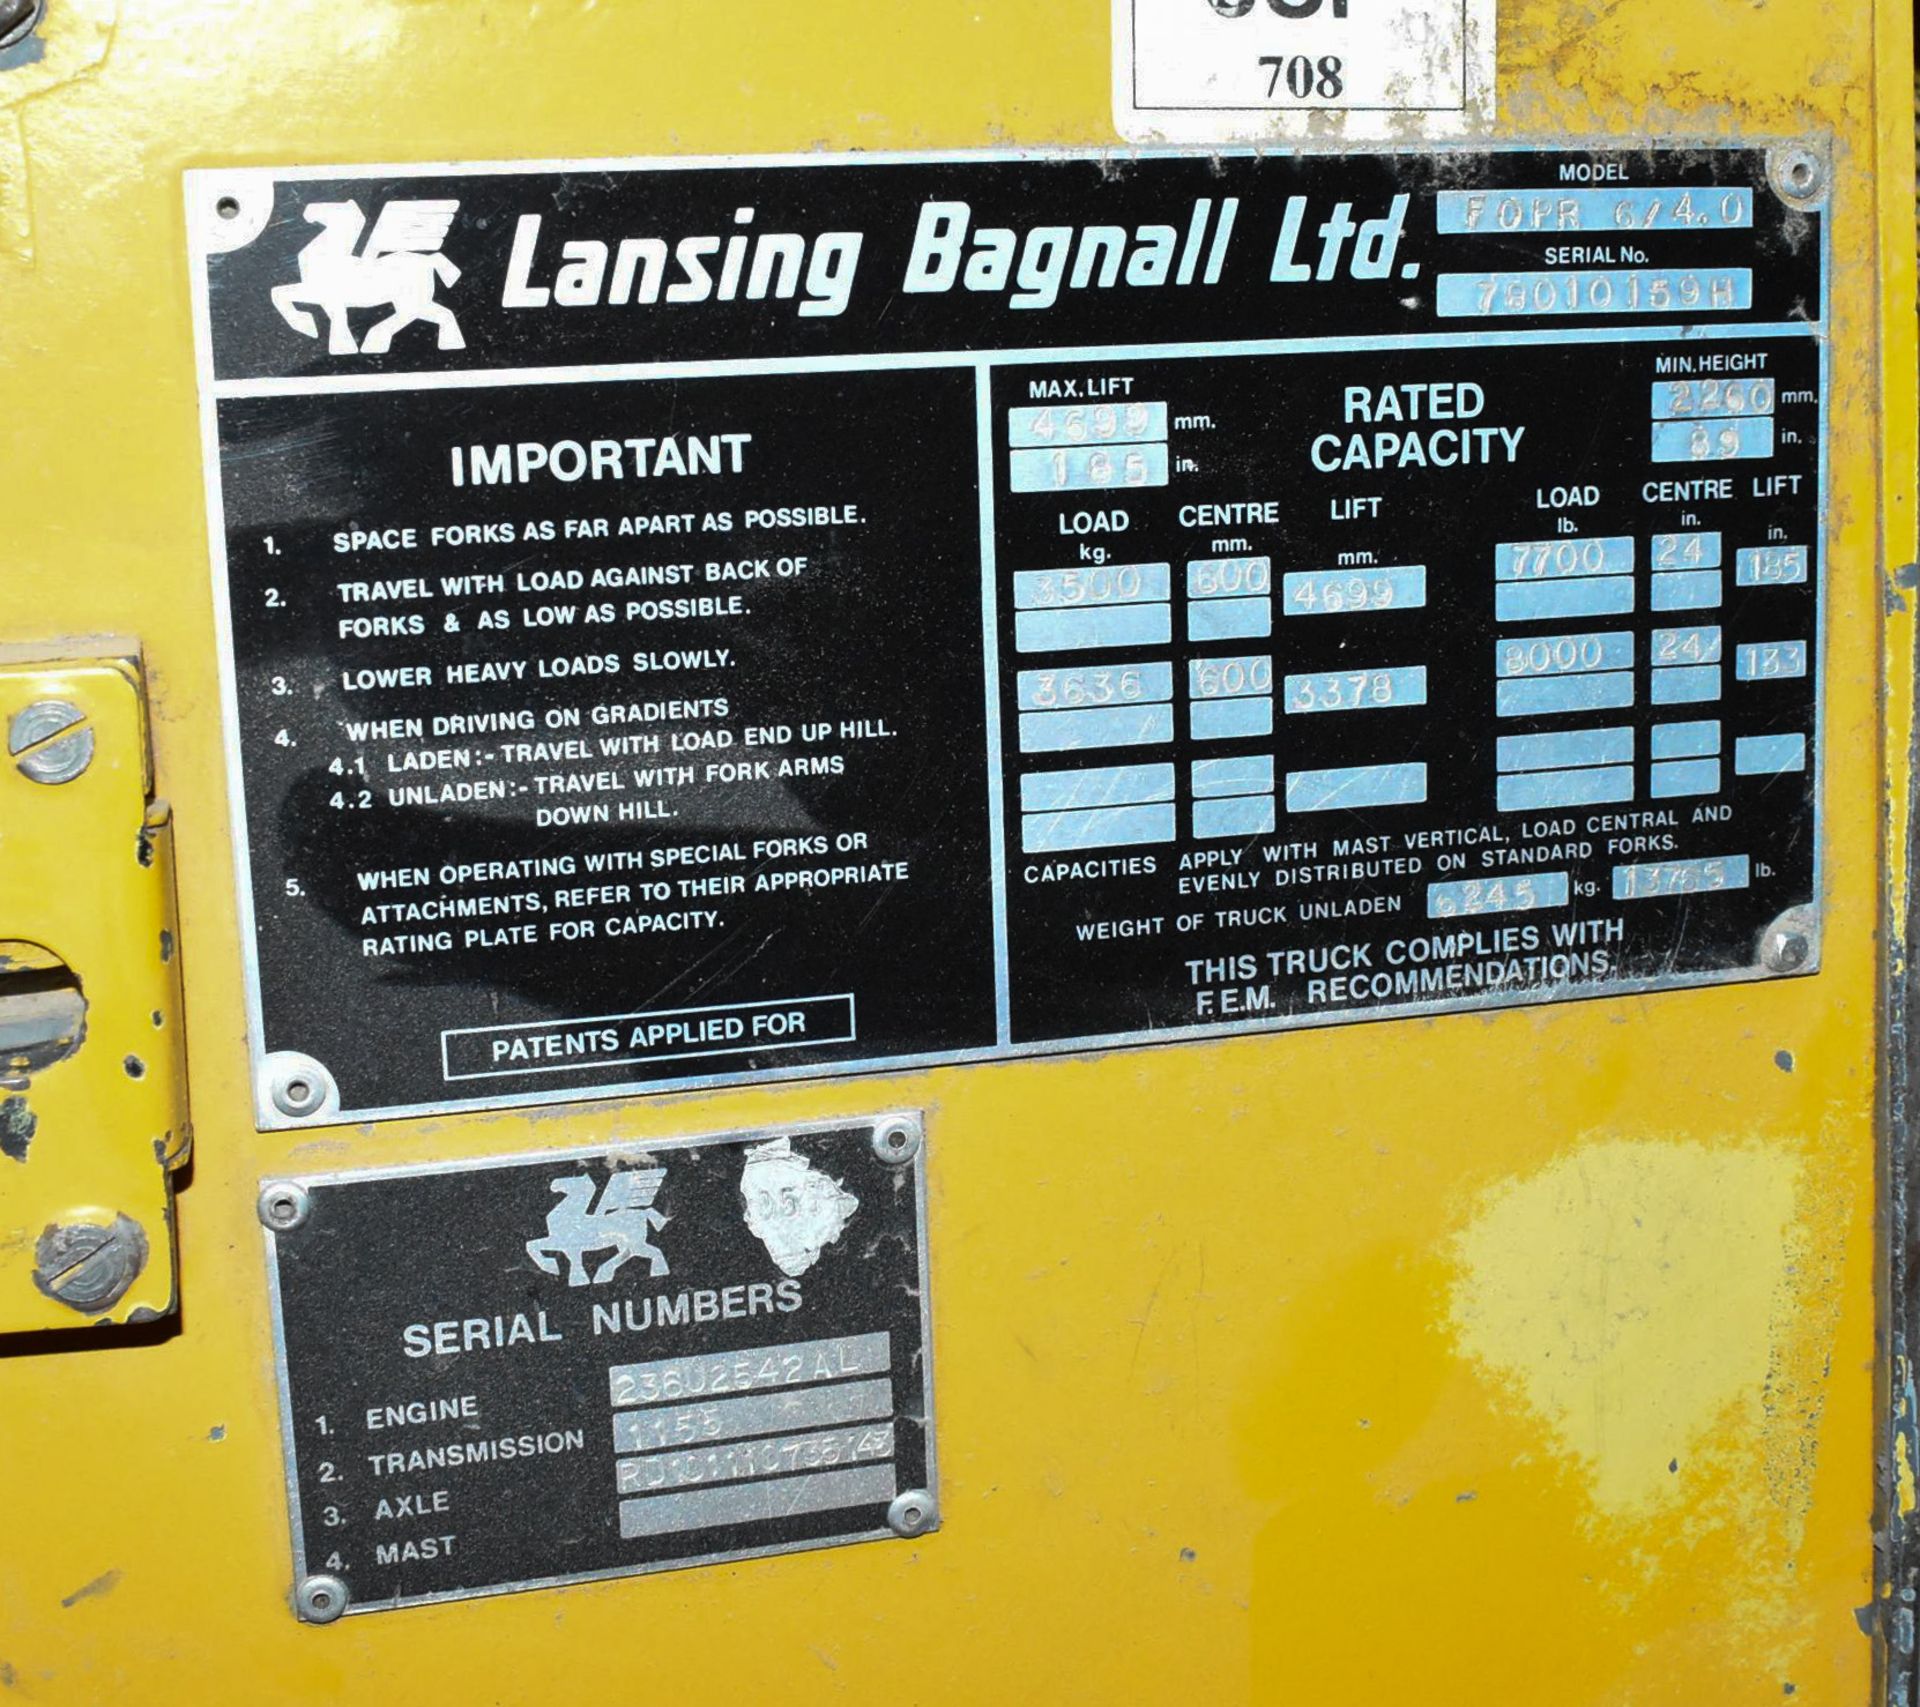 LANSING BAGNALL FOPR6 4.0 LPG OUTDOOR FORKLIFT WITH 8000 LB. CAPACITY, 185" MAX. LIFT HEIGHT, - Image 7 of 8